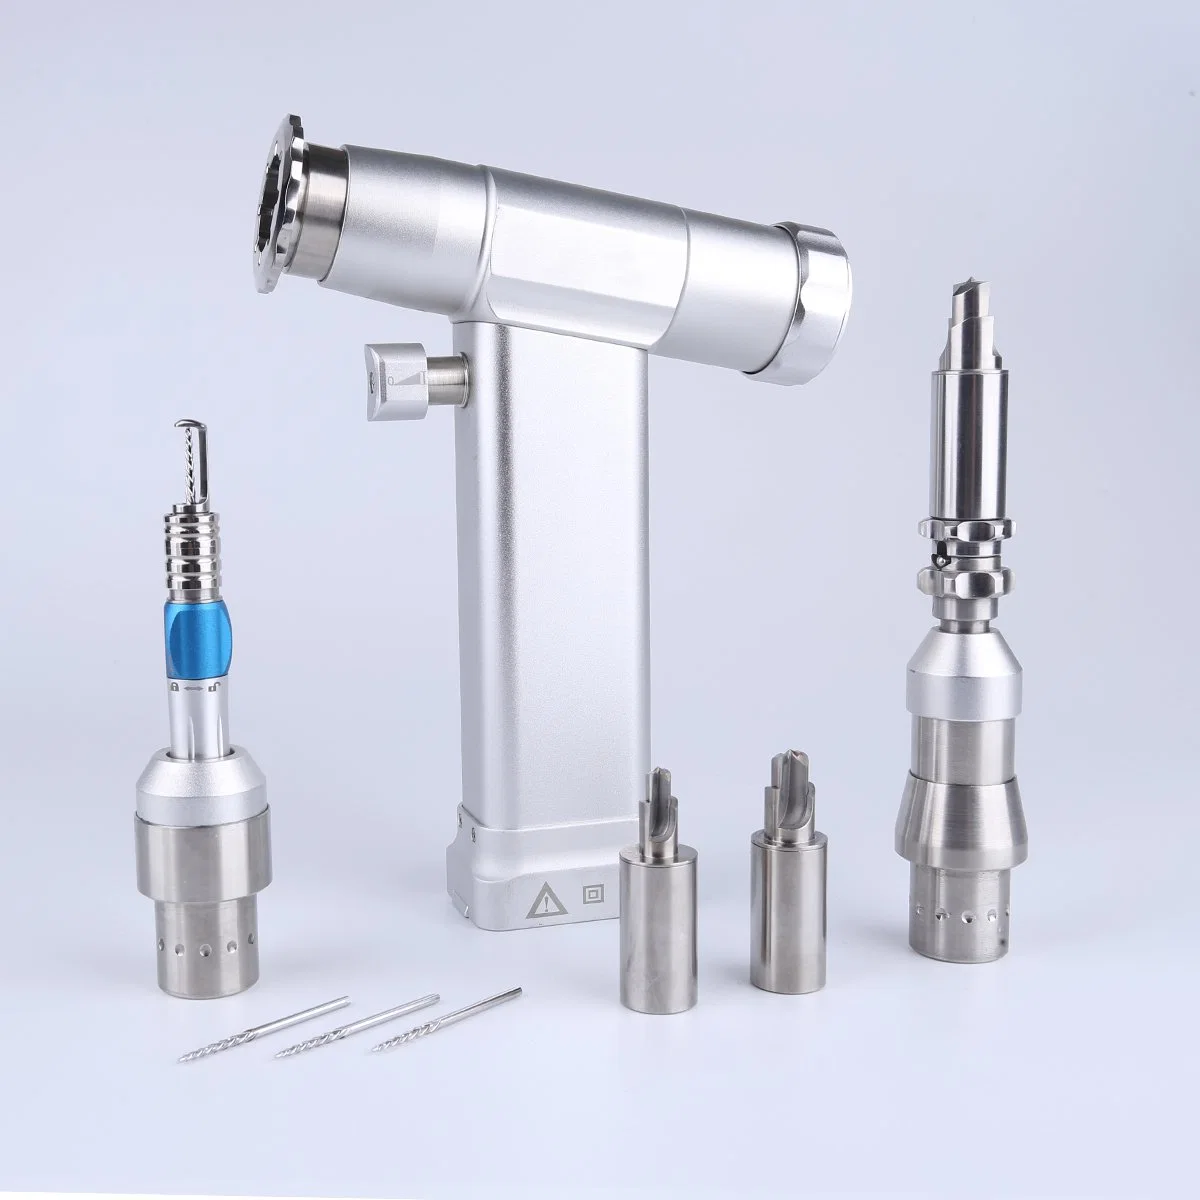 Xc Medico High quality/High cost performance  Medical Surgery Electric Bone Drill Multifunction Drill Orthopedic Surgical Drill Saw